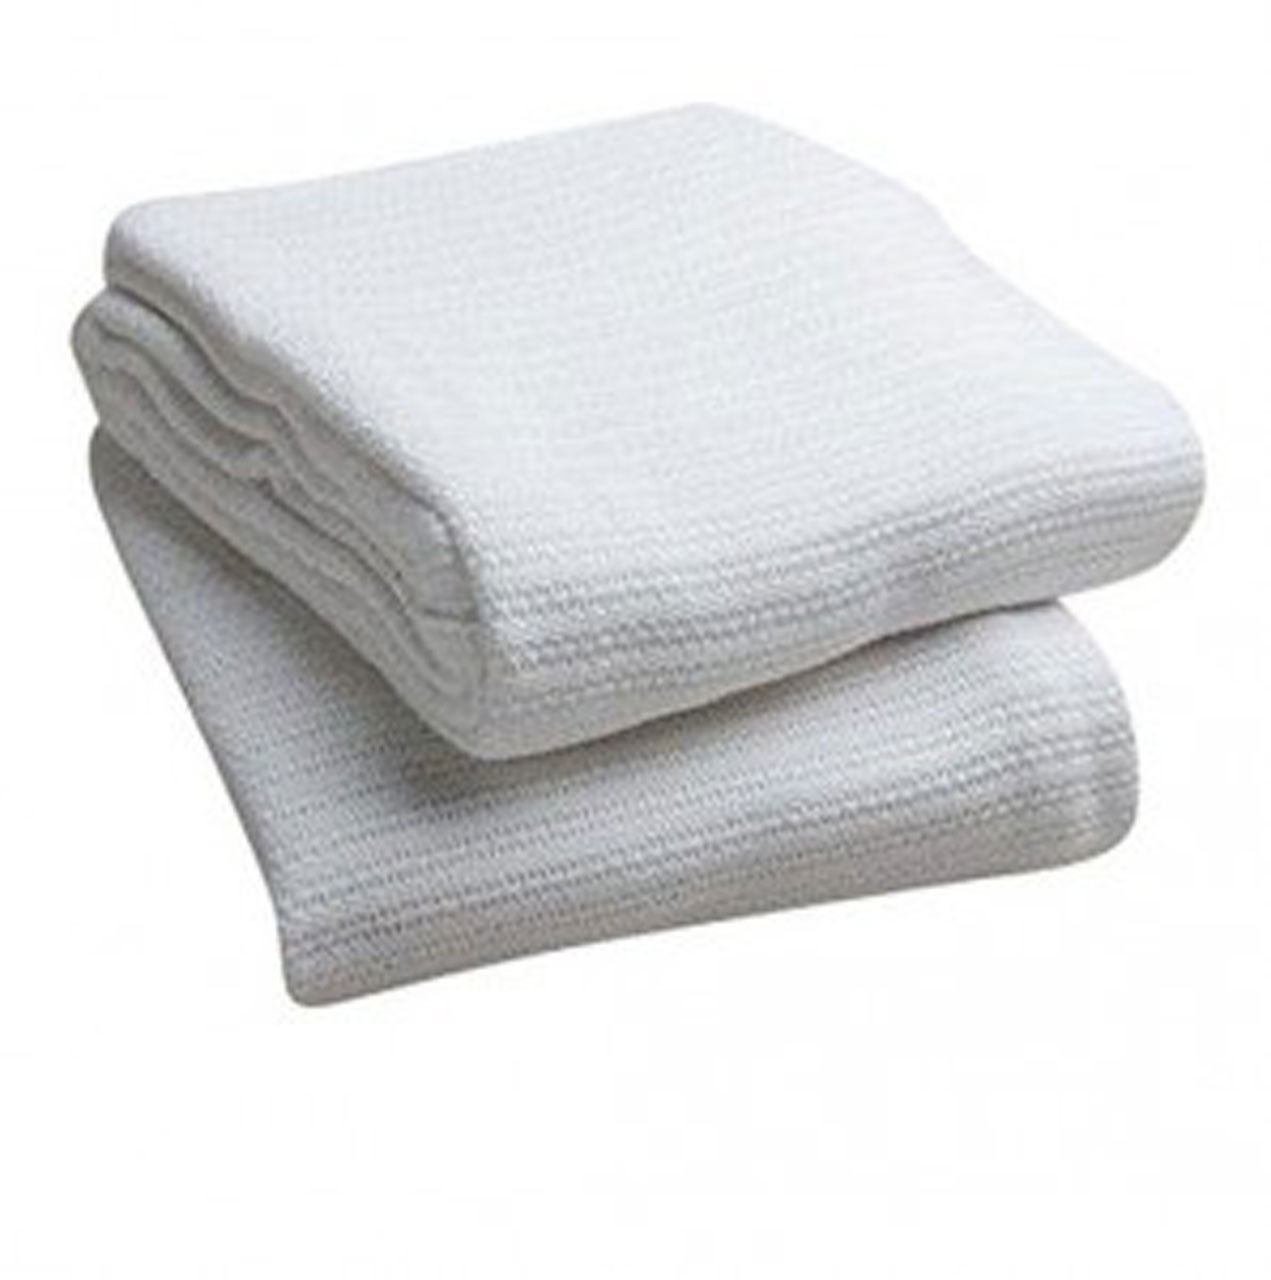 What colors are available for the Open Weave Thermal Blanket, White?